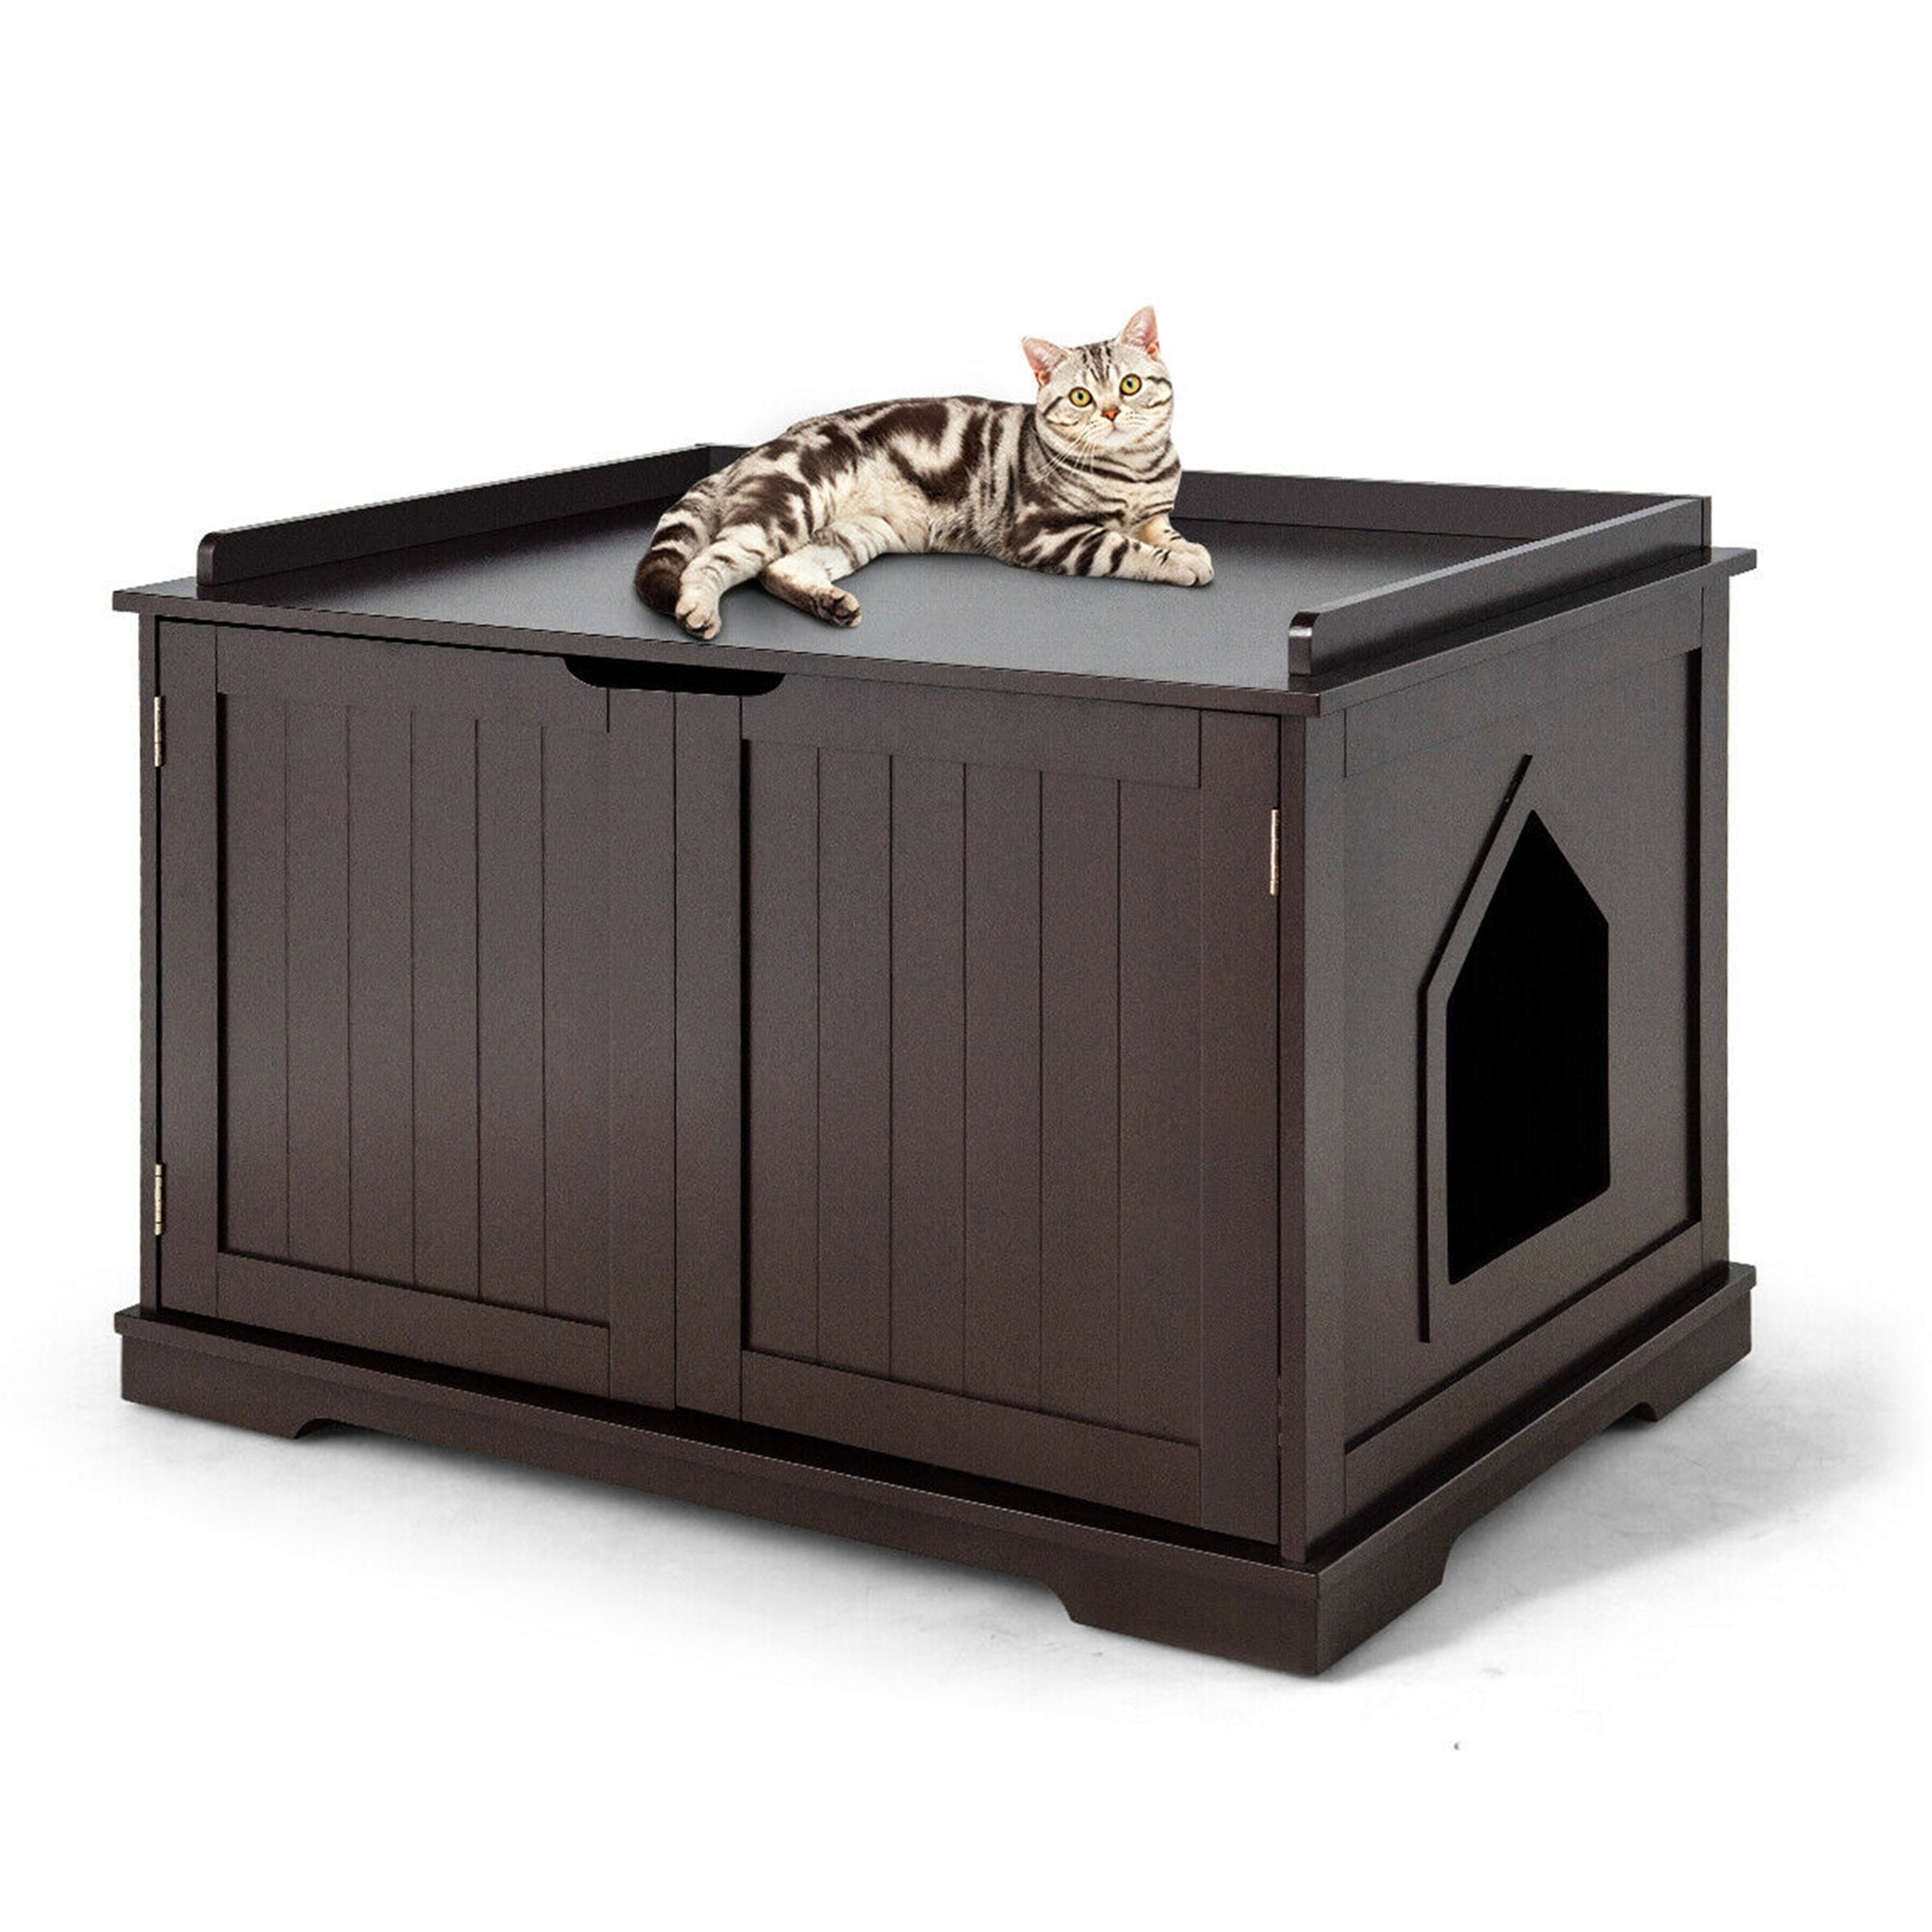 Gymax Cat Litter Box Wooden Enclosure Pet House Sidetable Washroom